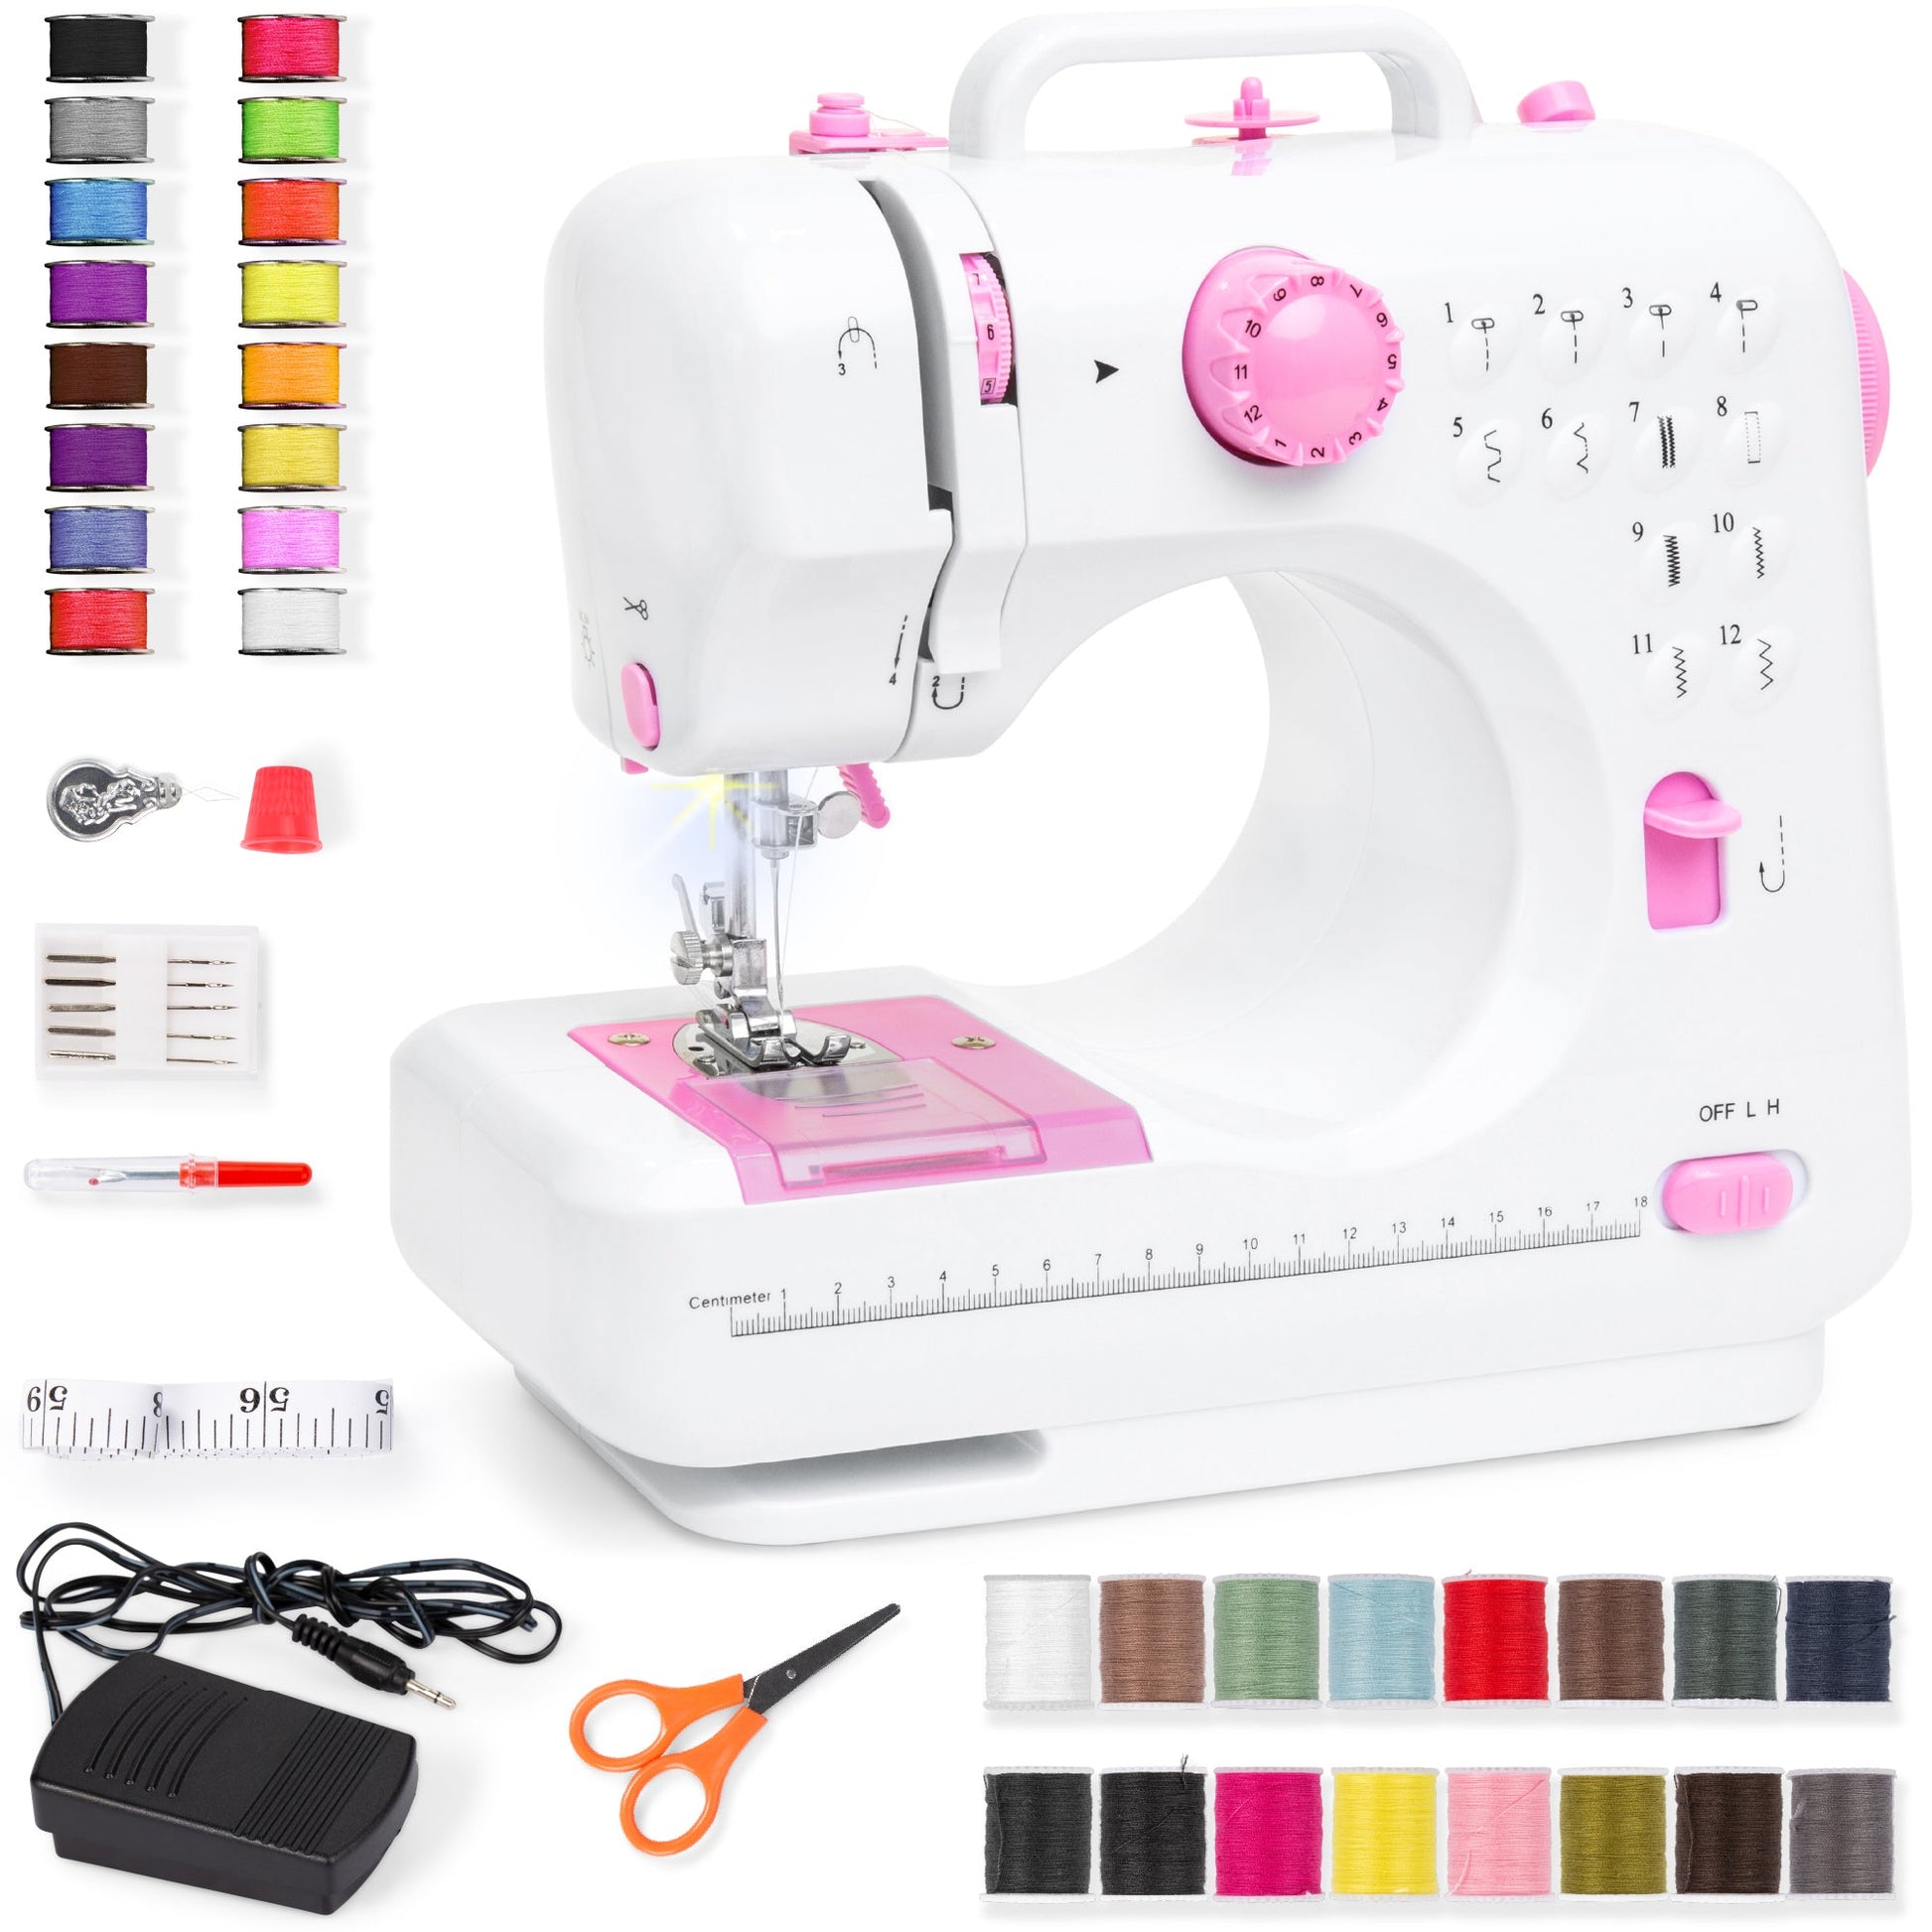 6V Portable Foot Pedal Sewing Machine w/ 12 Stitch Patterns